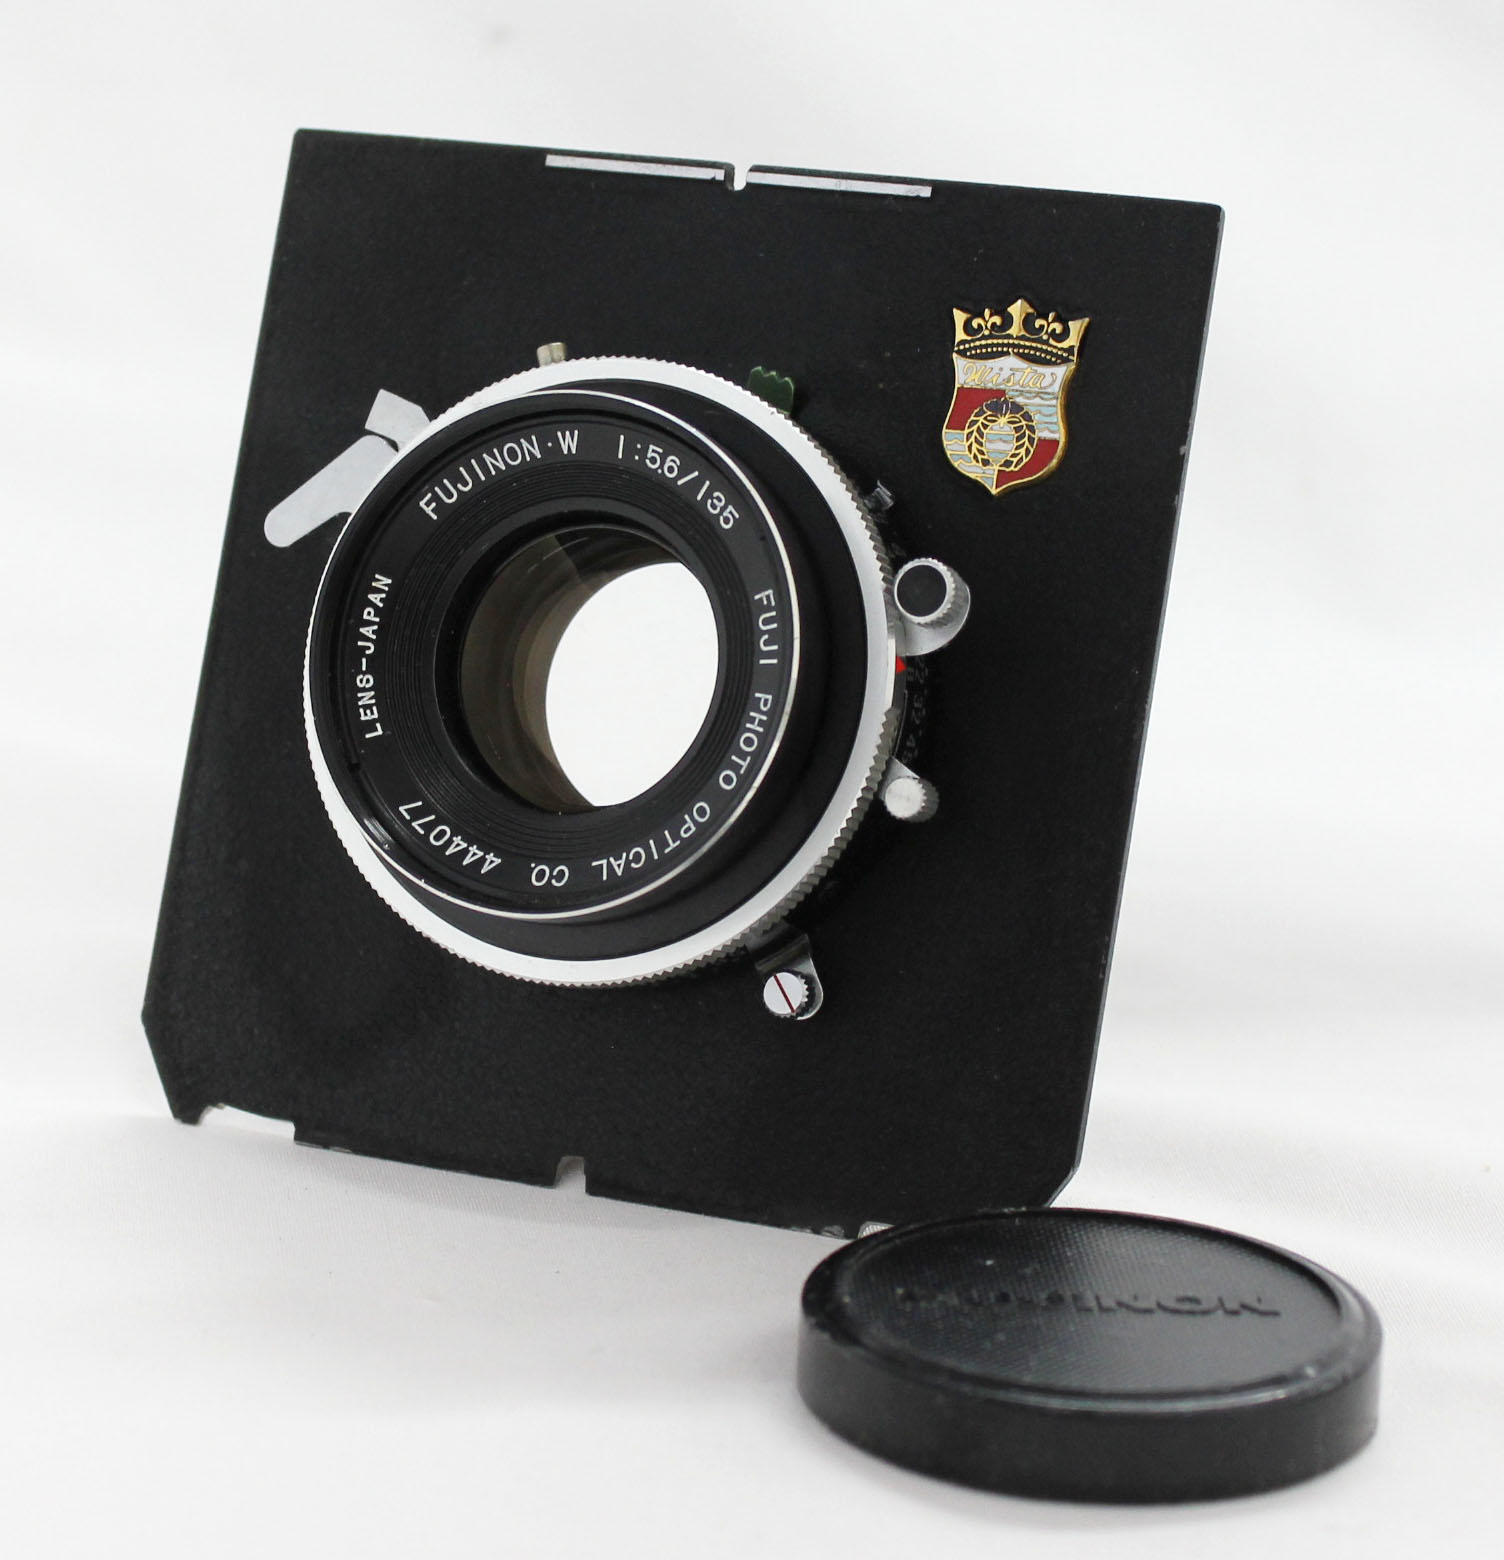 Japan Used Camera Shop | Fuji Fujinon W 135mm F/5.6 4x5 Large Format Lens with Seiko Shutter from Japan